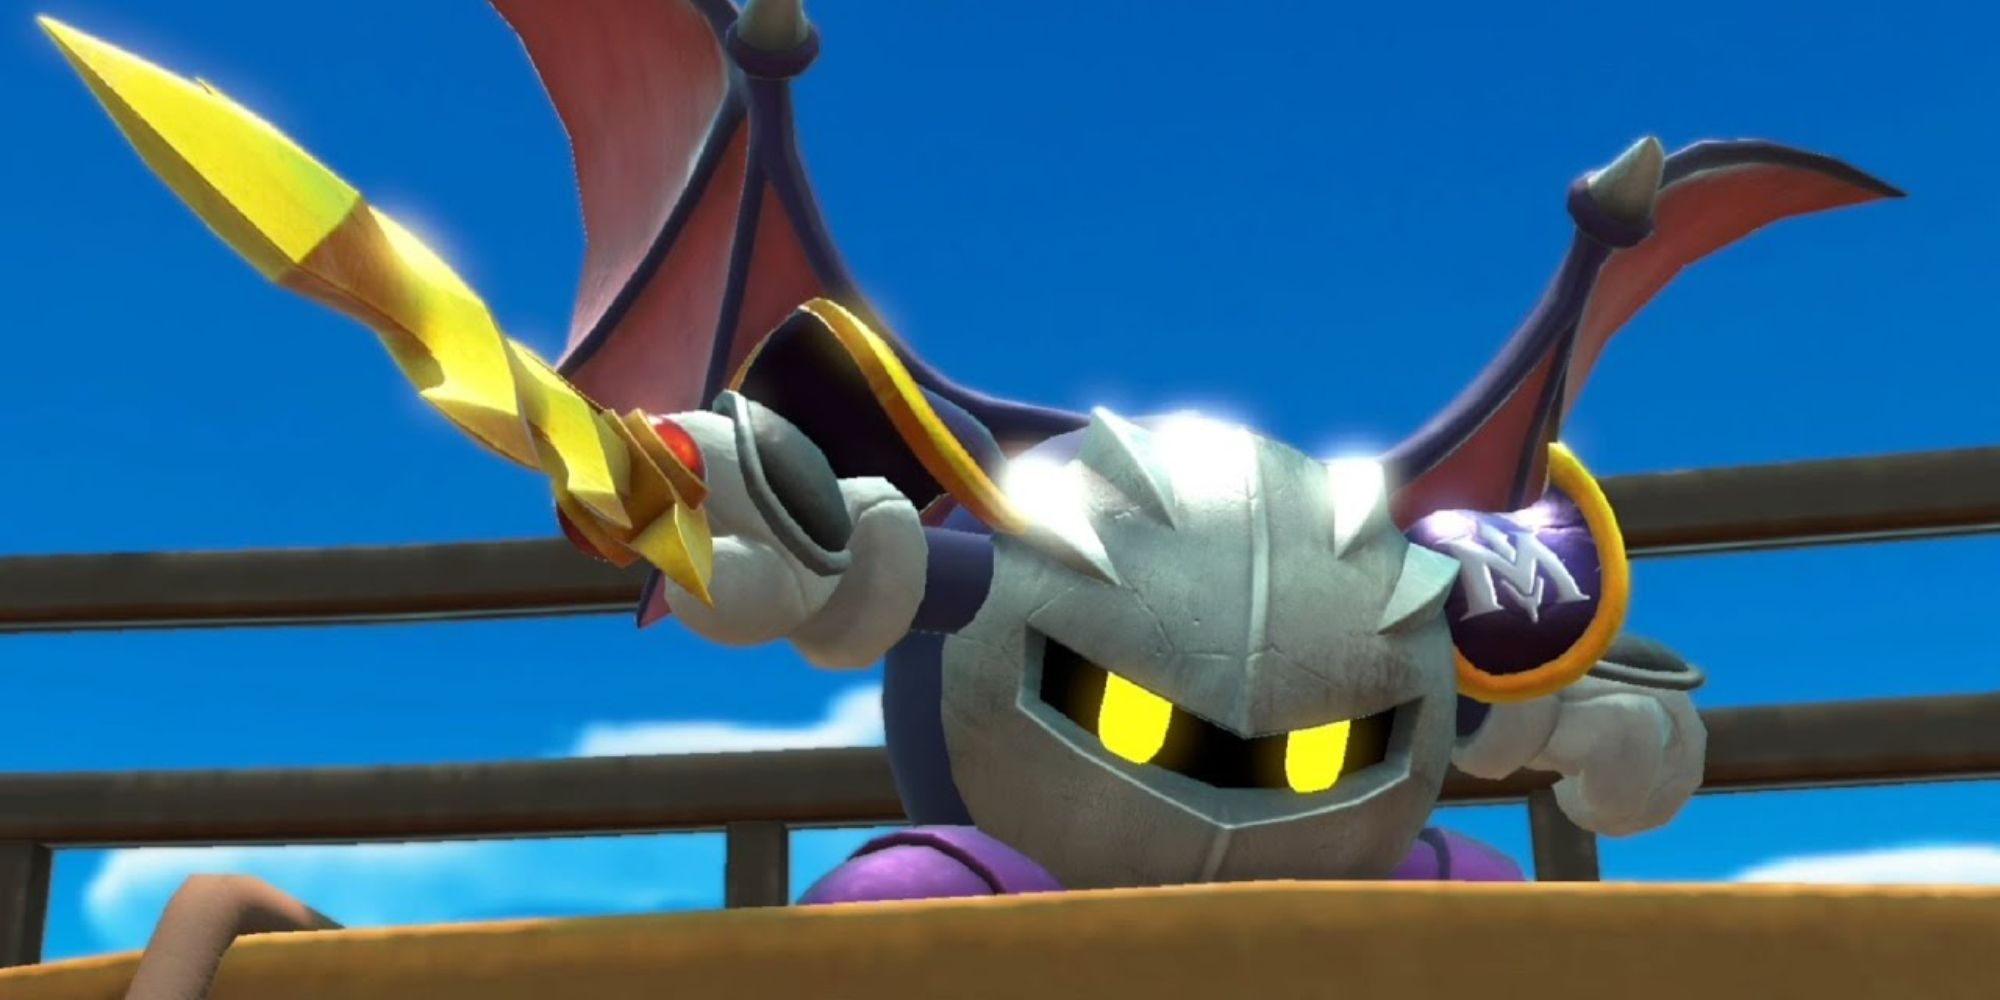 Meta Knight with his sword drawn on a ledge